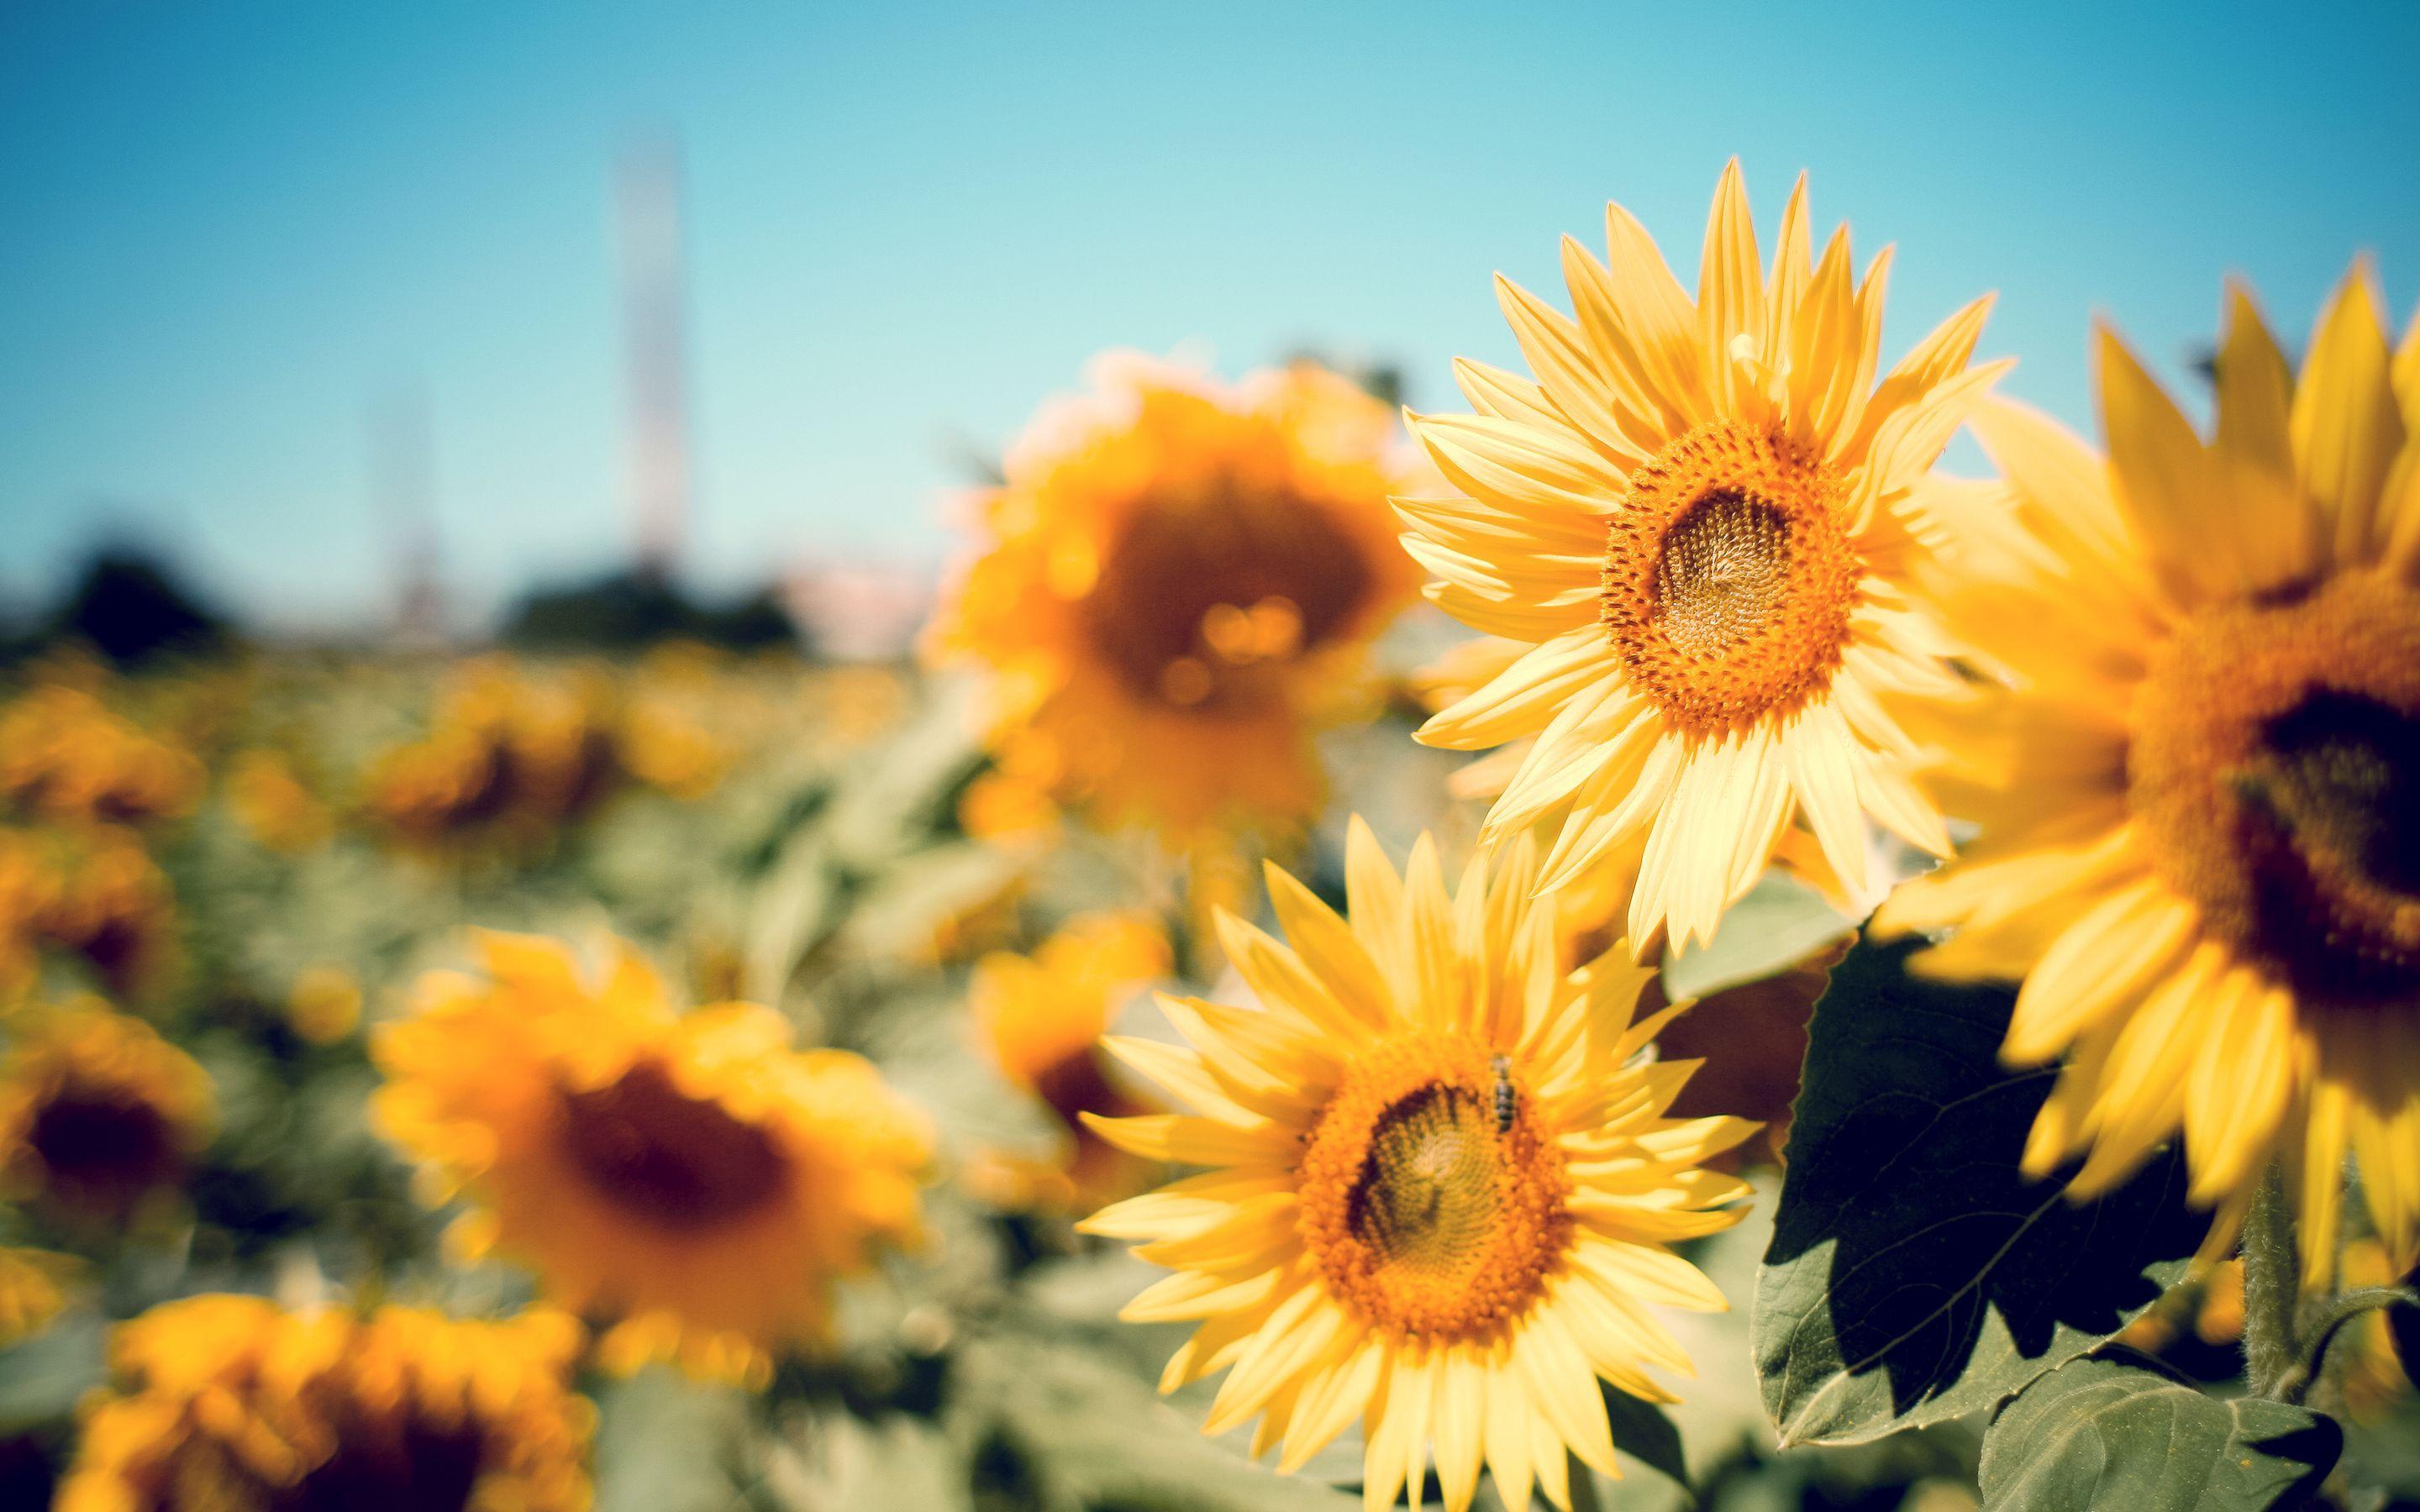 Top 999+ Sunflower Wallpaper Full HD, 4K✓Free to Use